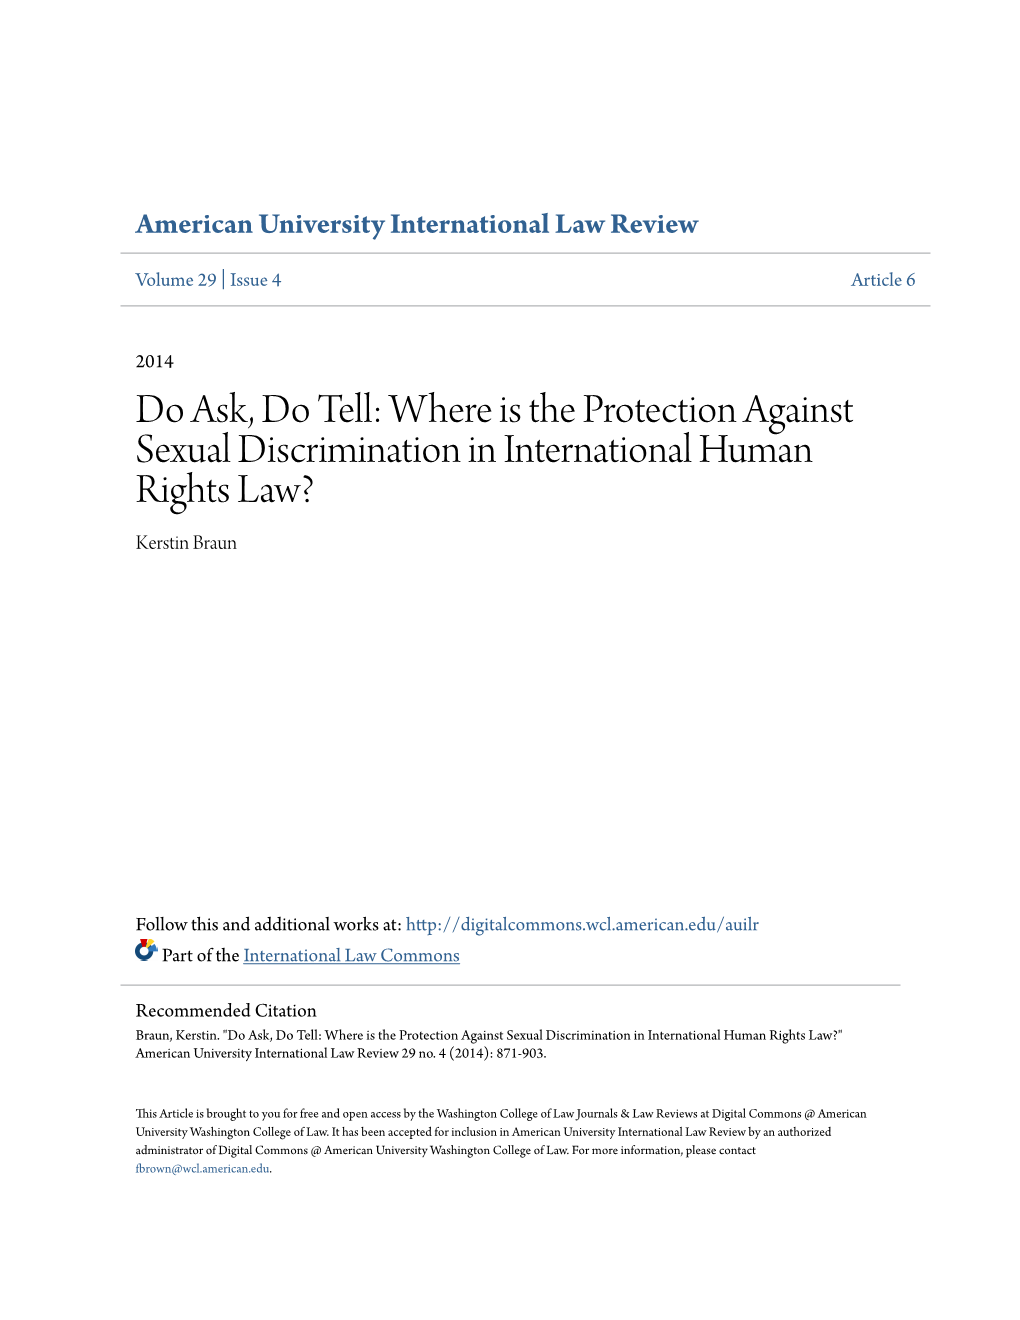 Where Is the Protection Against Sexual Discrimination in International Human Rights Law? Kerstin Braun